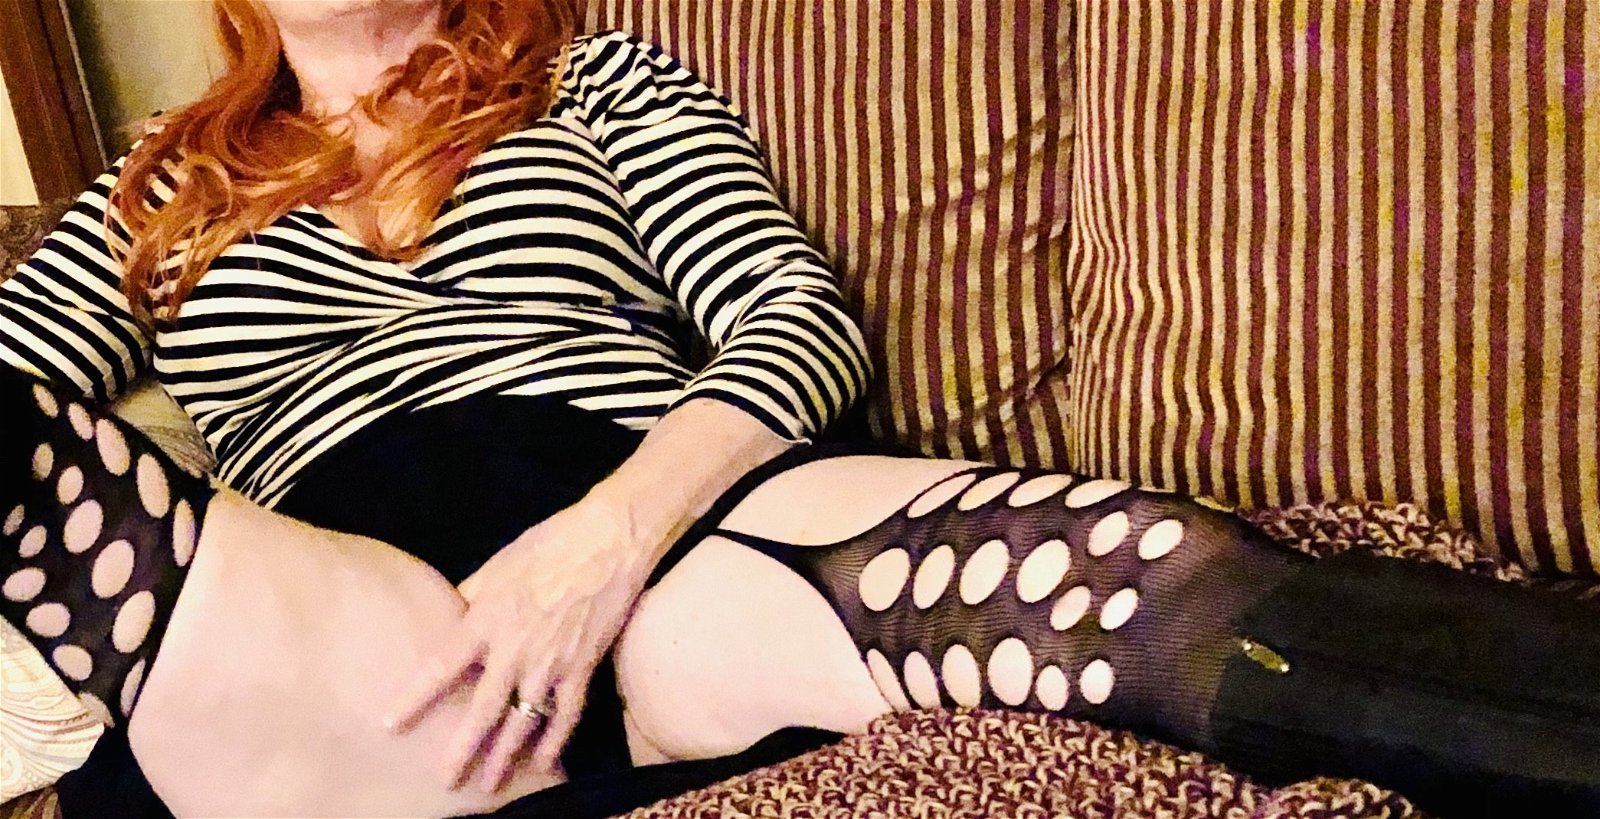 Photo by RedHead Hotwife with the username @RubyRedHeadHotwife,  November 9, 2020 at 4:22 AM. The post is about the topic MILF and the text says 'let me know what you think'